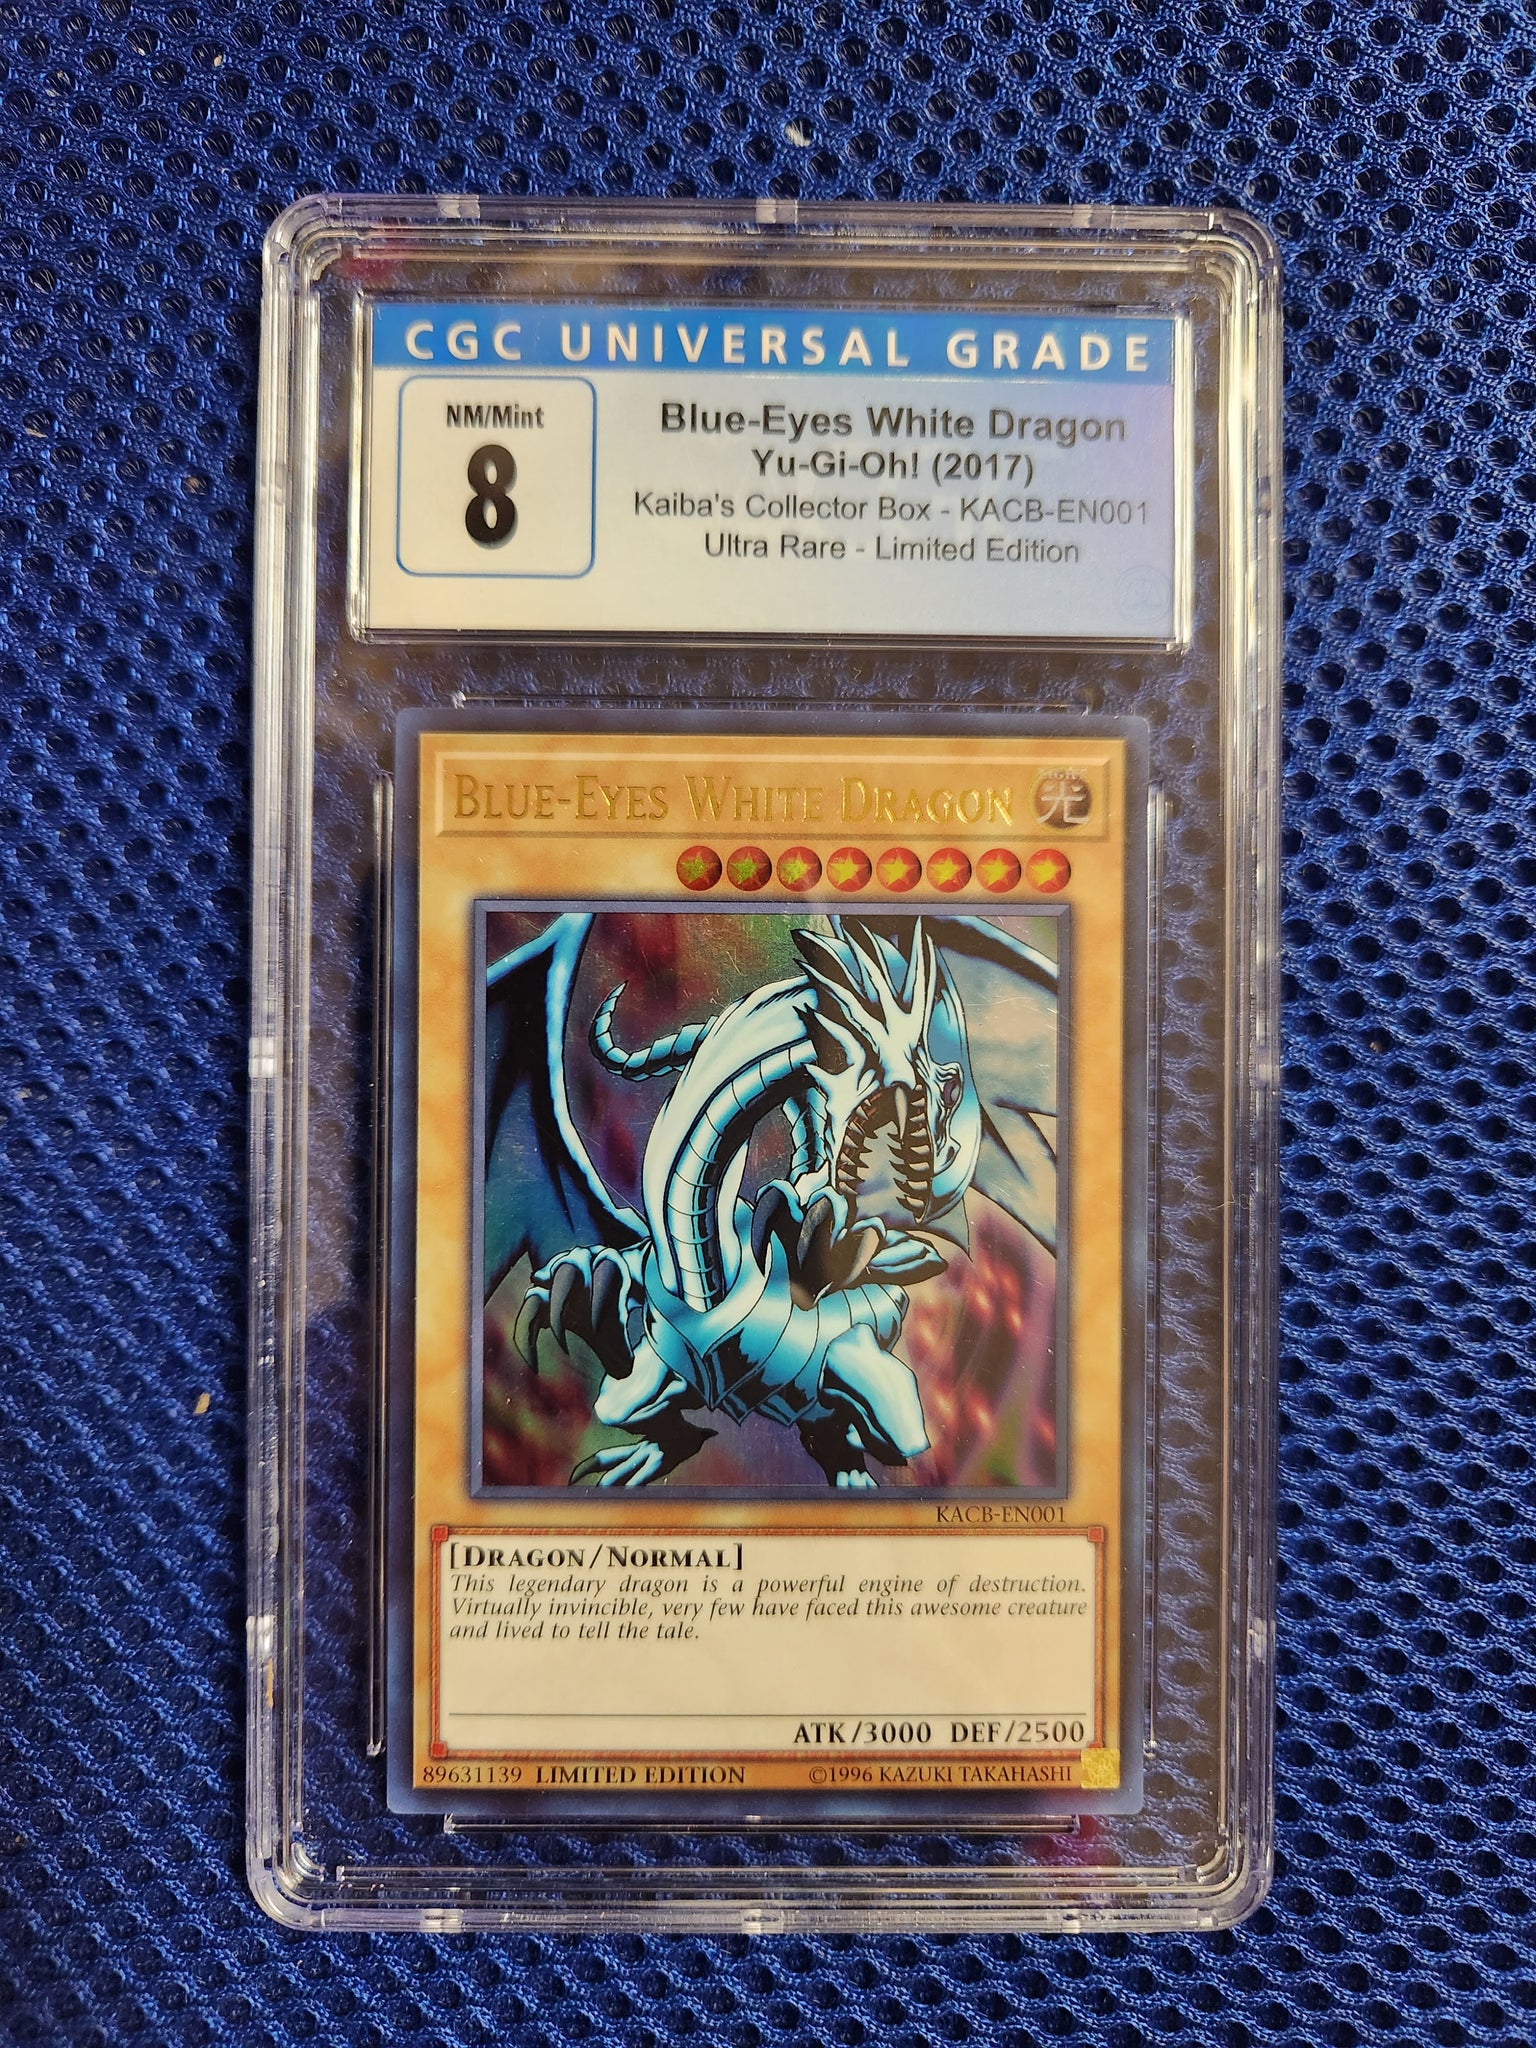 Blue-Eyes White Dragon - Yu-Gi-Oh! (2017) - Legendary Collection - KACB-EN001 - Ultra Rare - Limited Edition CGC Graded 8 (In Frame)